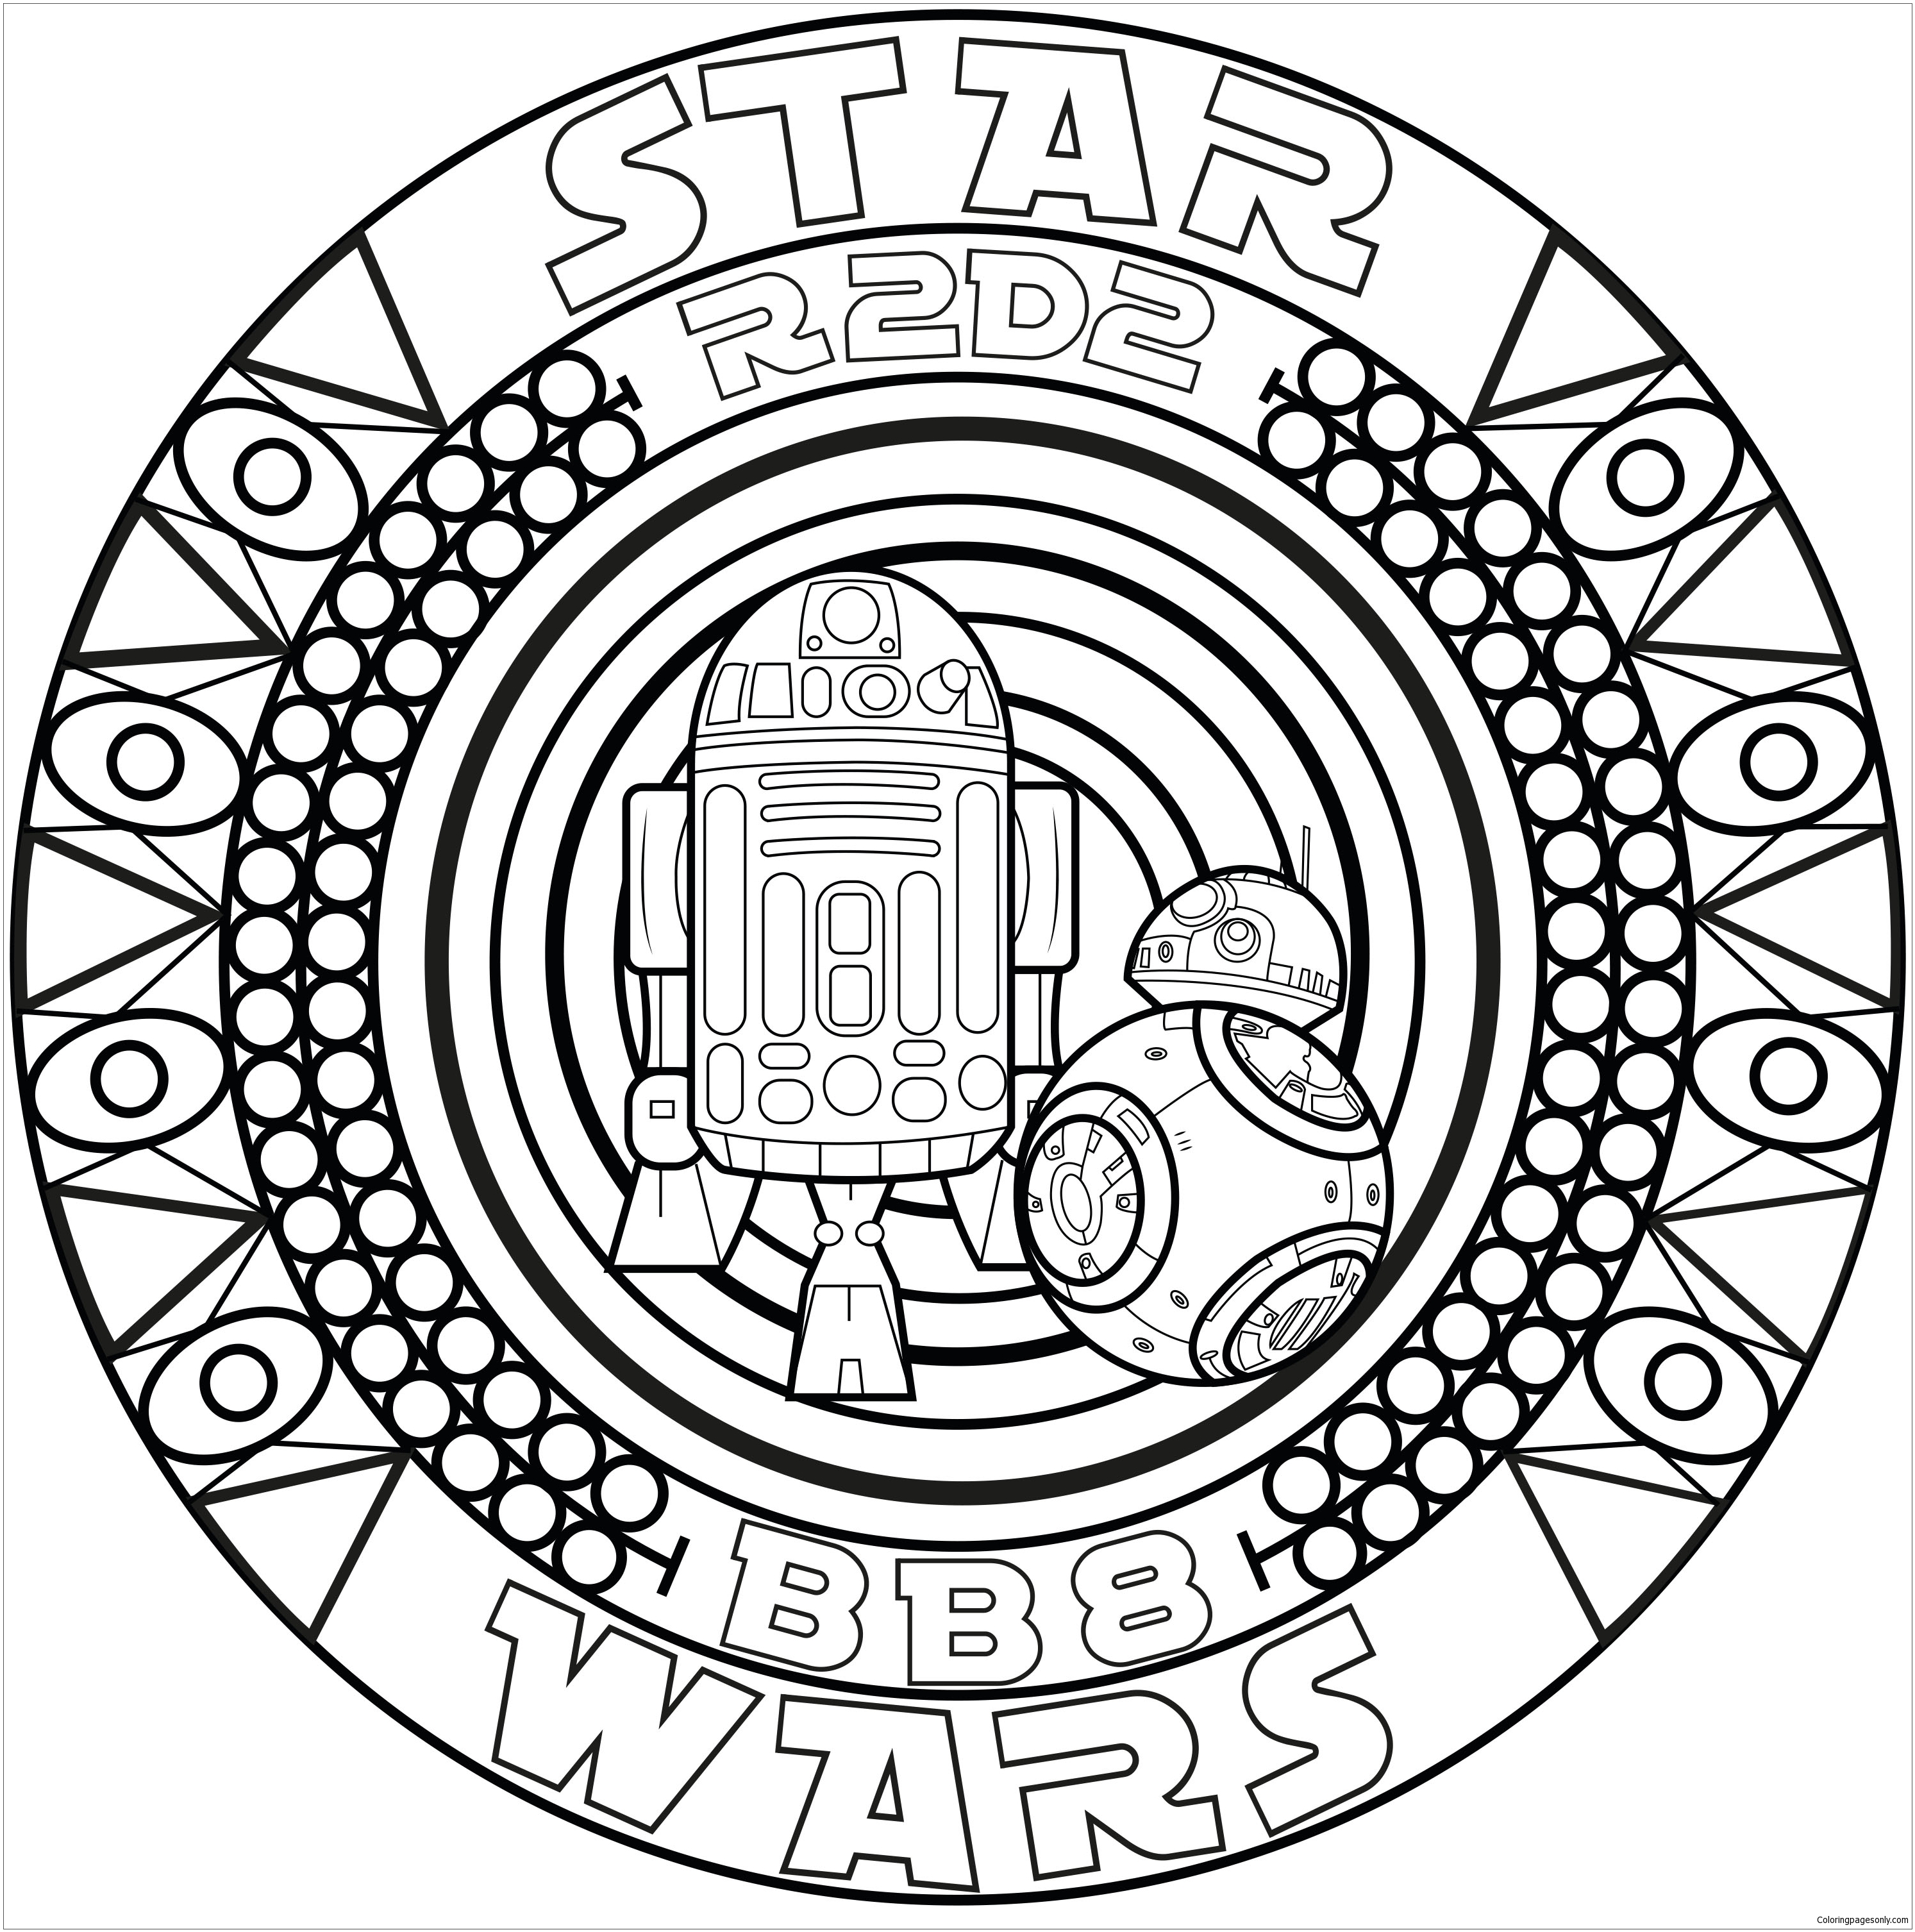 A mandala inspired by Star Wars with the robots BB8 and R2D2 Coloring Pages